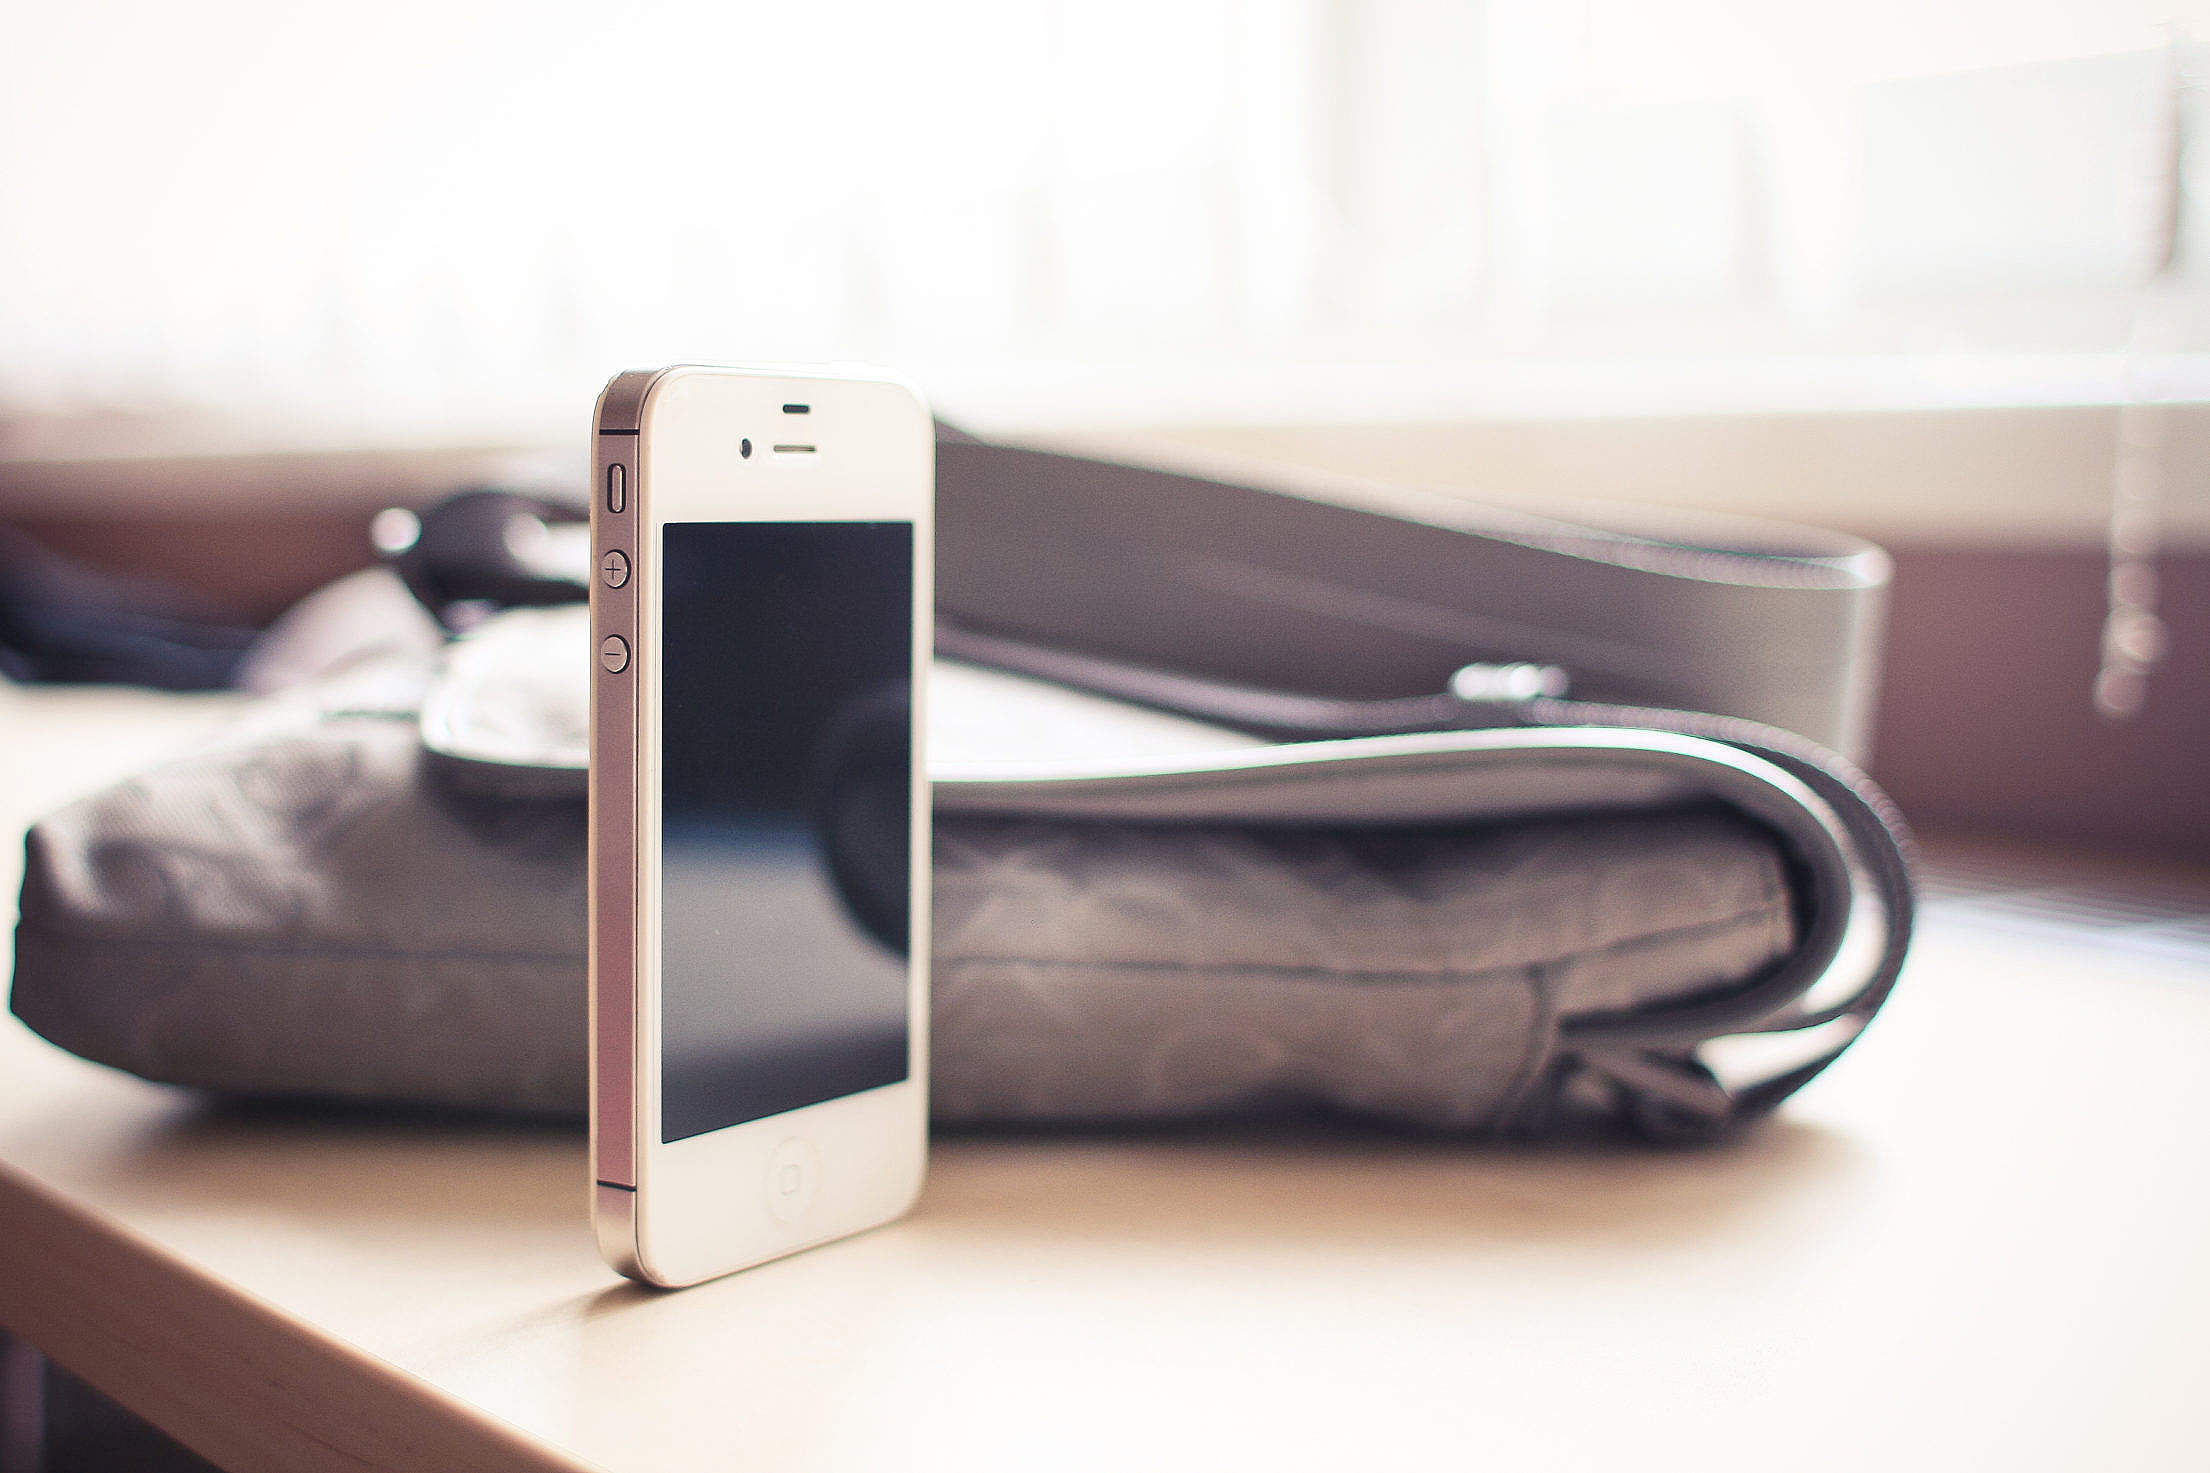 White iPhone 4S standing on the Desk Free Stock Photo